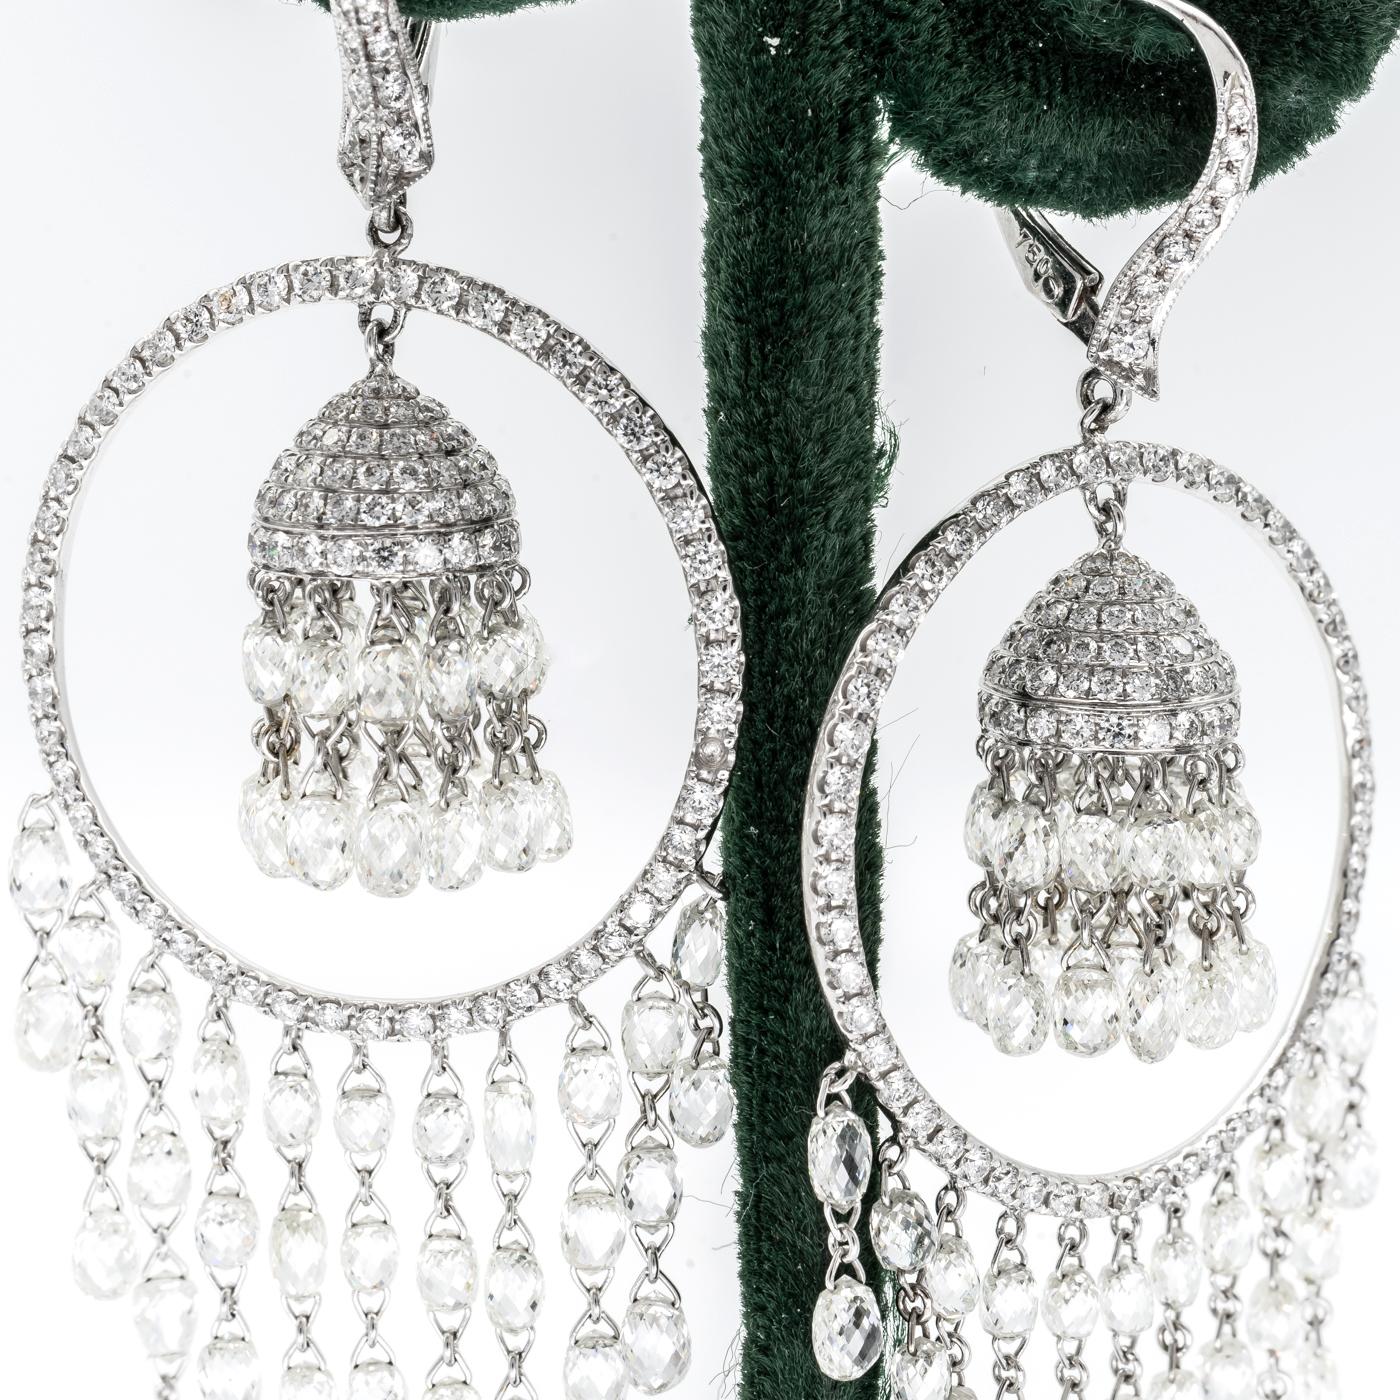 A pair of drop diamond earrings, designed as a round brilliant-cut diamond set open circle, with a diamond drop to the centre, with briolette-cut diamond tassels, with a total diamond weight of 25.91ct, mounted in 18ct white gold.